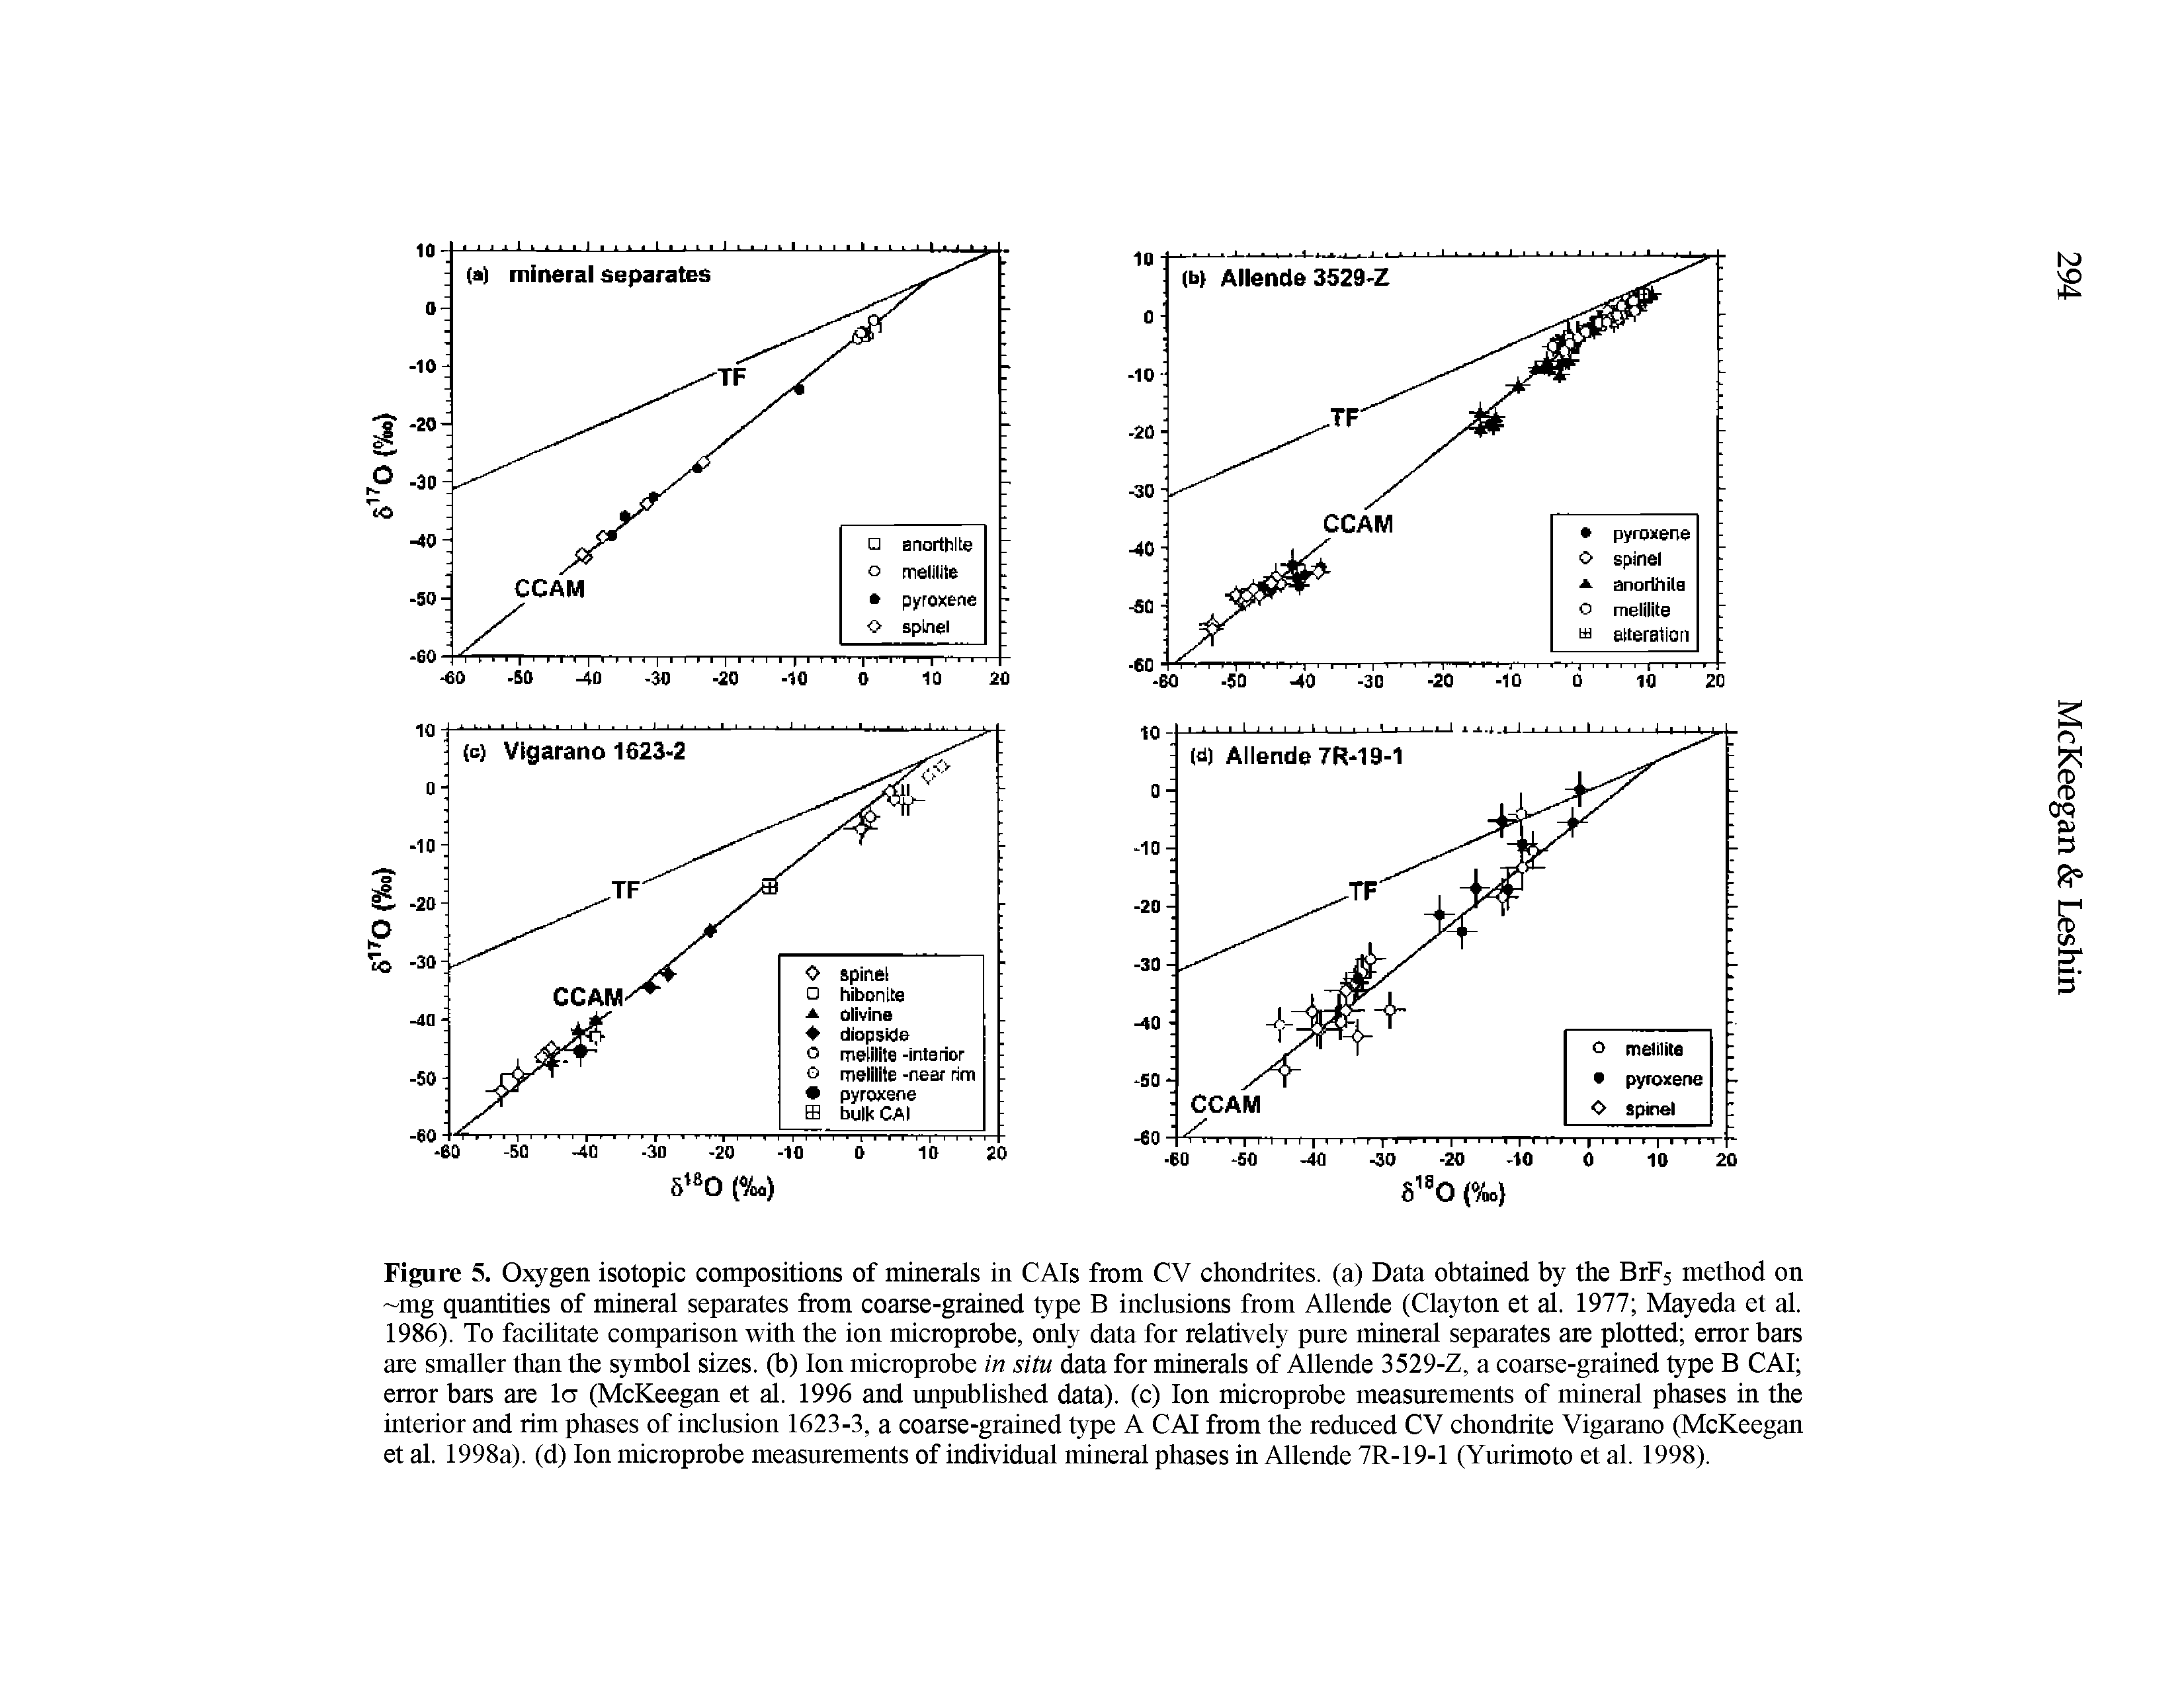 Figure 5. Oxygen isotopic compositions of minerals in CAIs from CV chondrites, (a) Data obtained by the BrFs method on mg quantities of mineral separates from coarse-grained type B inclusions from Allende (Clayton et al. 1977 Mayeda et al.